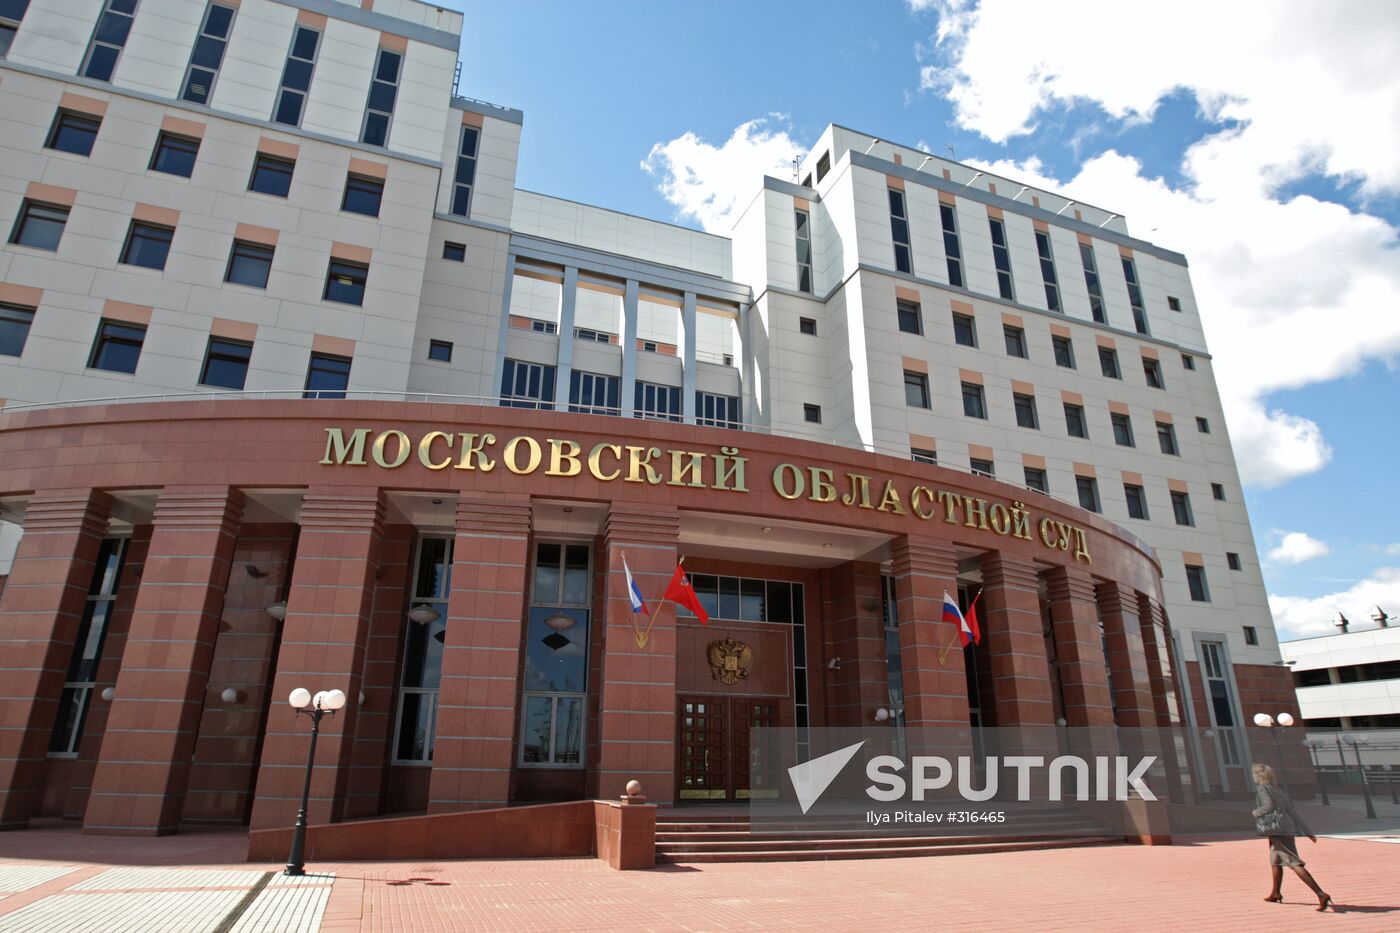 Moscow Regional Court